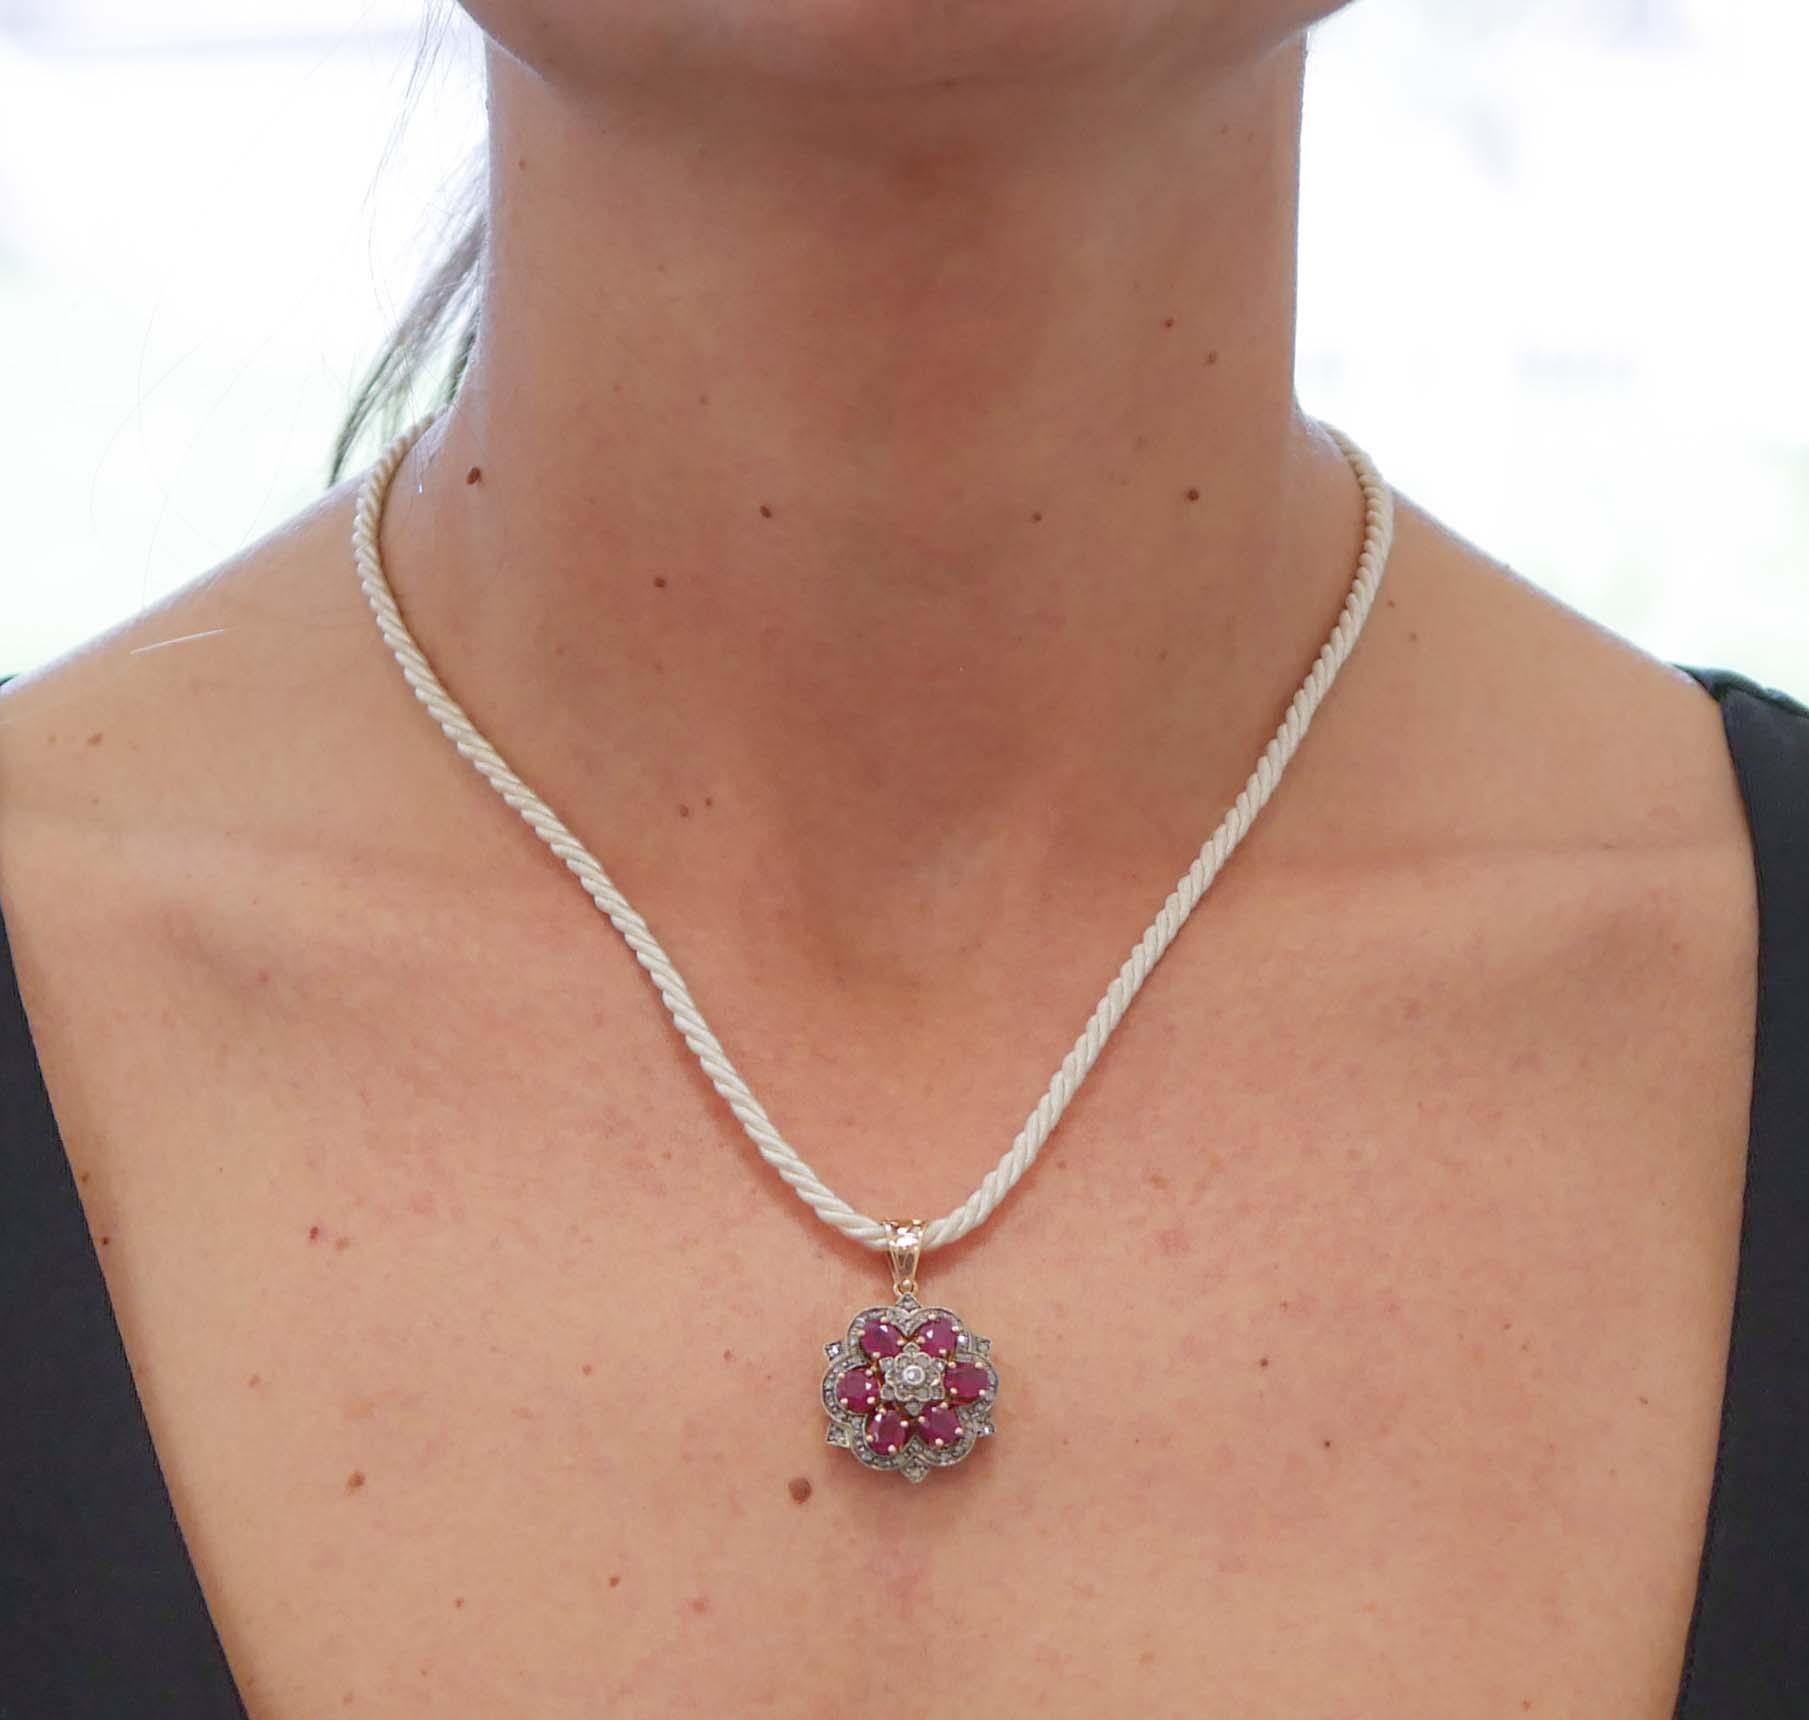 Women's Rubies, Diamonds, 14 Karat Rose Gold and Silver Pendant Necklace. For Sale